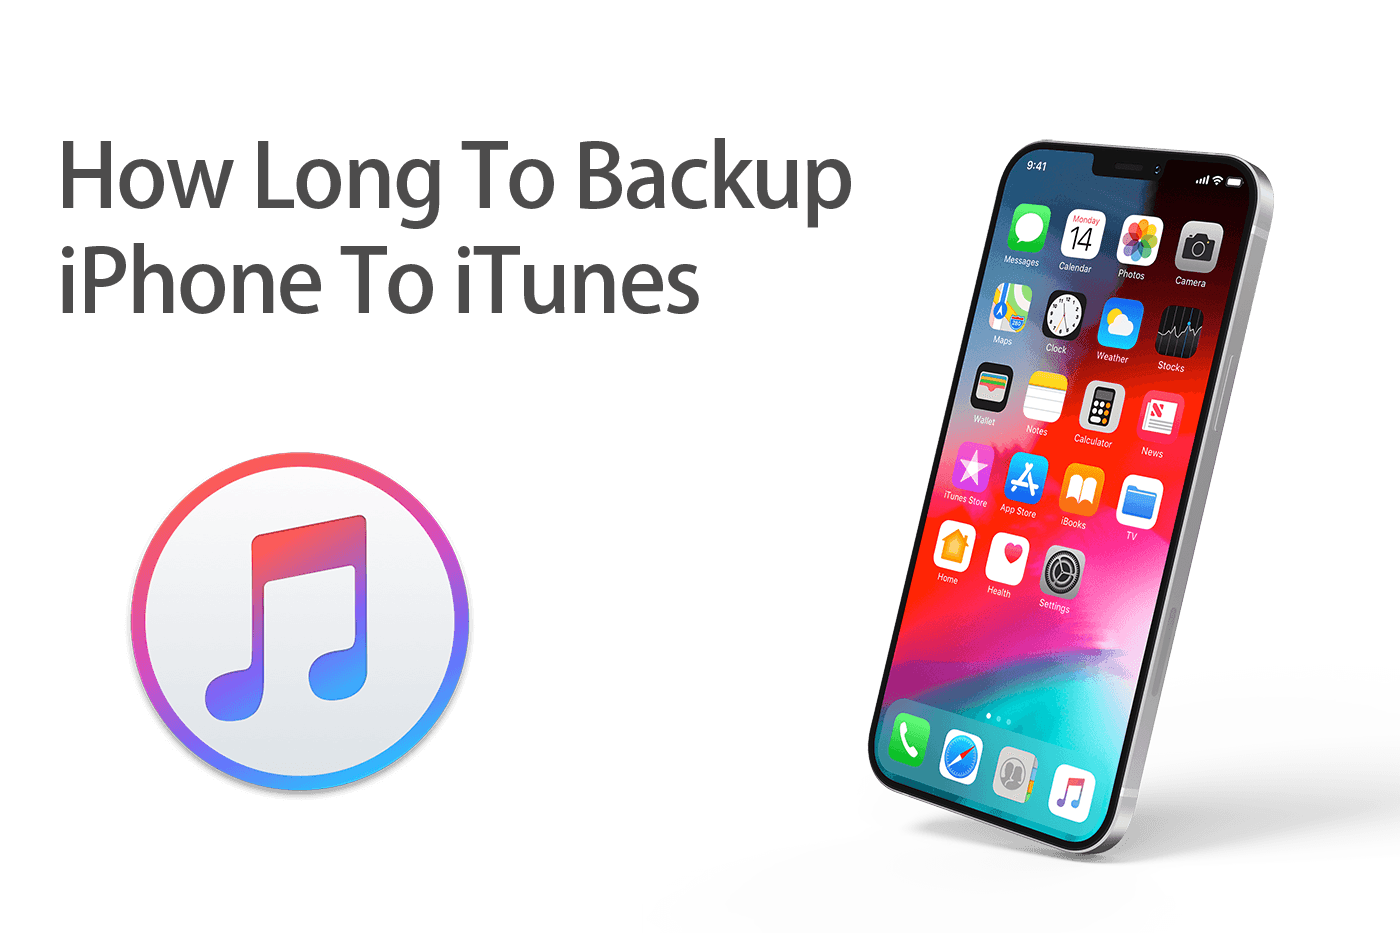 How Long Does It Take To Backup iPhone To iTunes